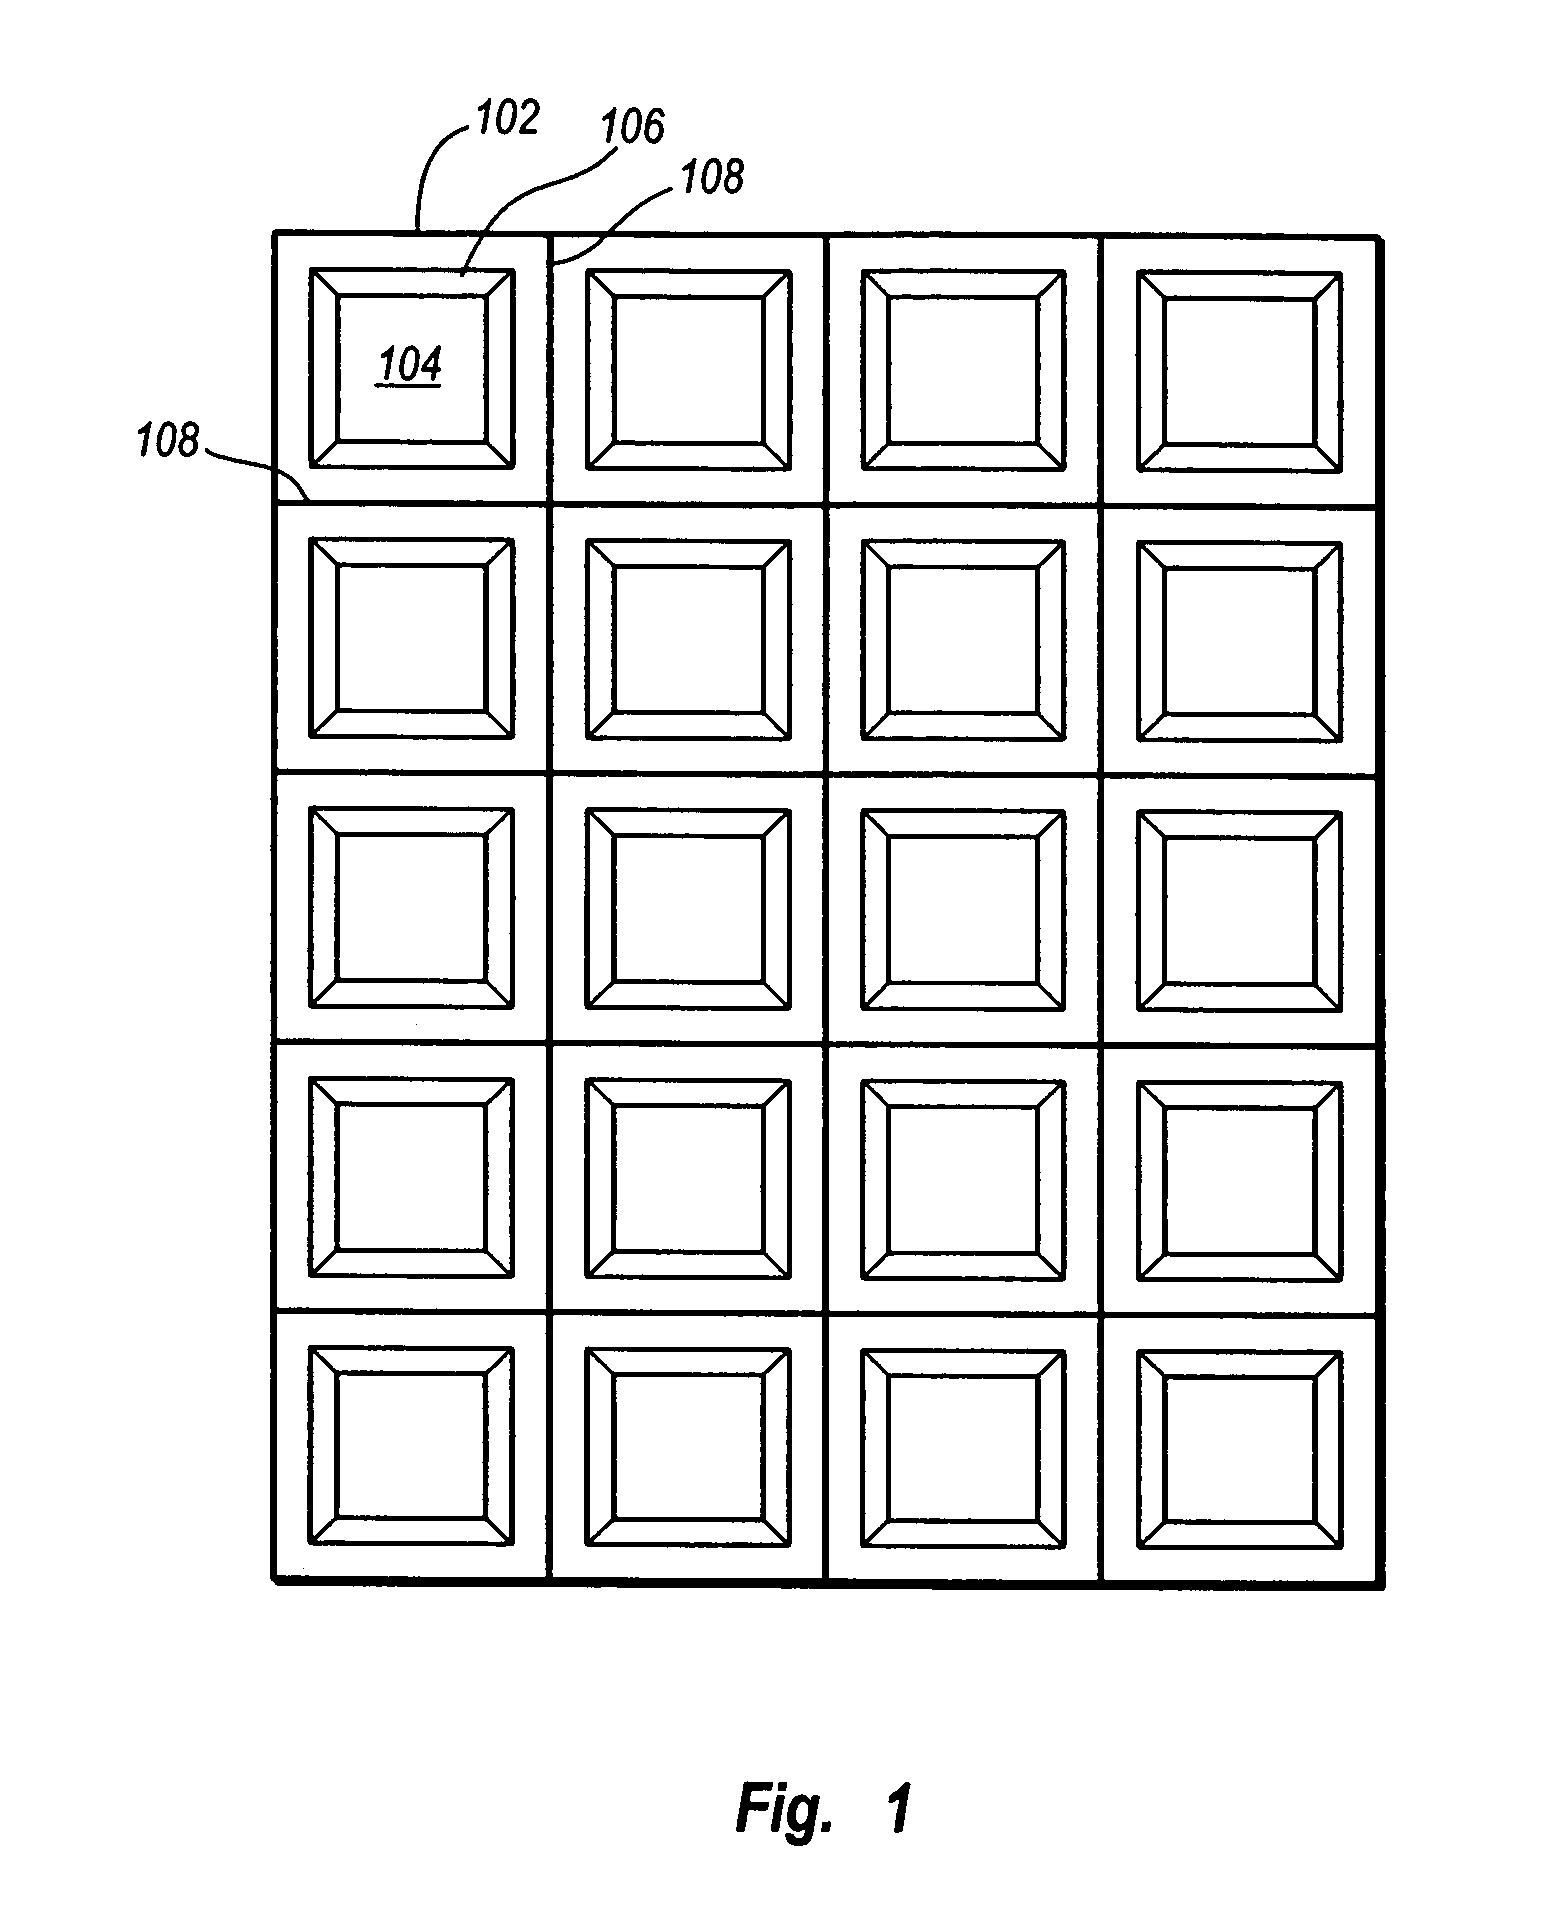 Integrated diode in a silicon chip scale package